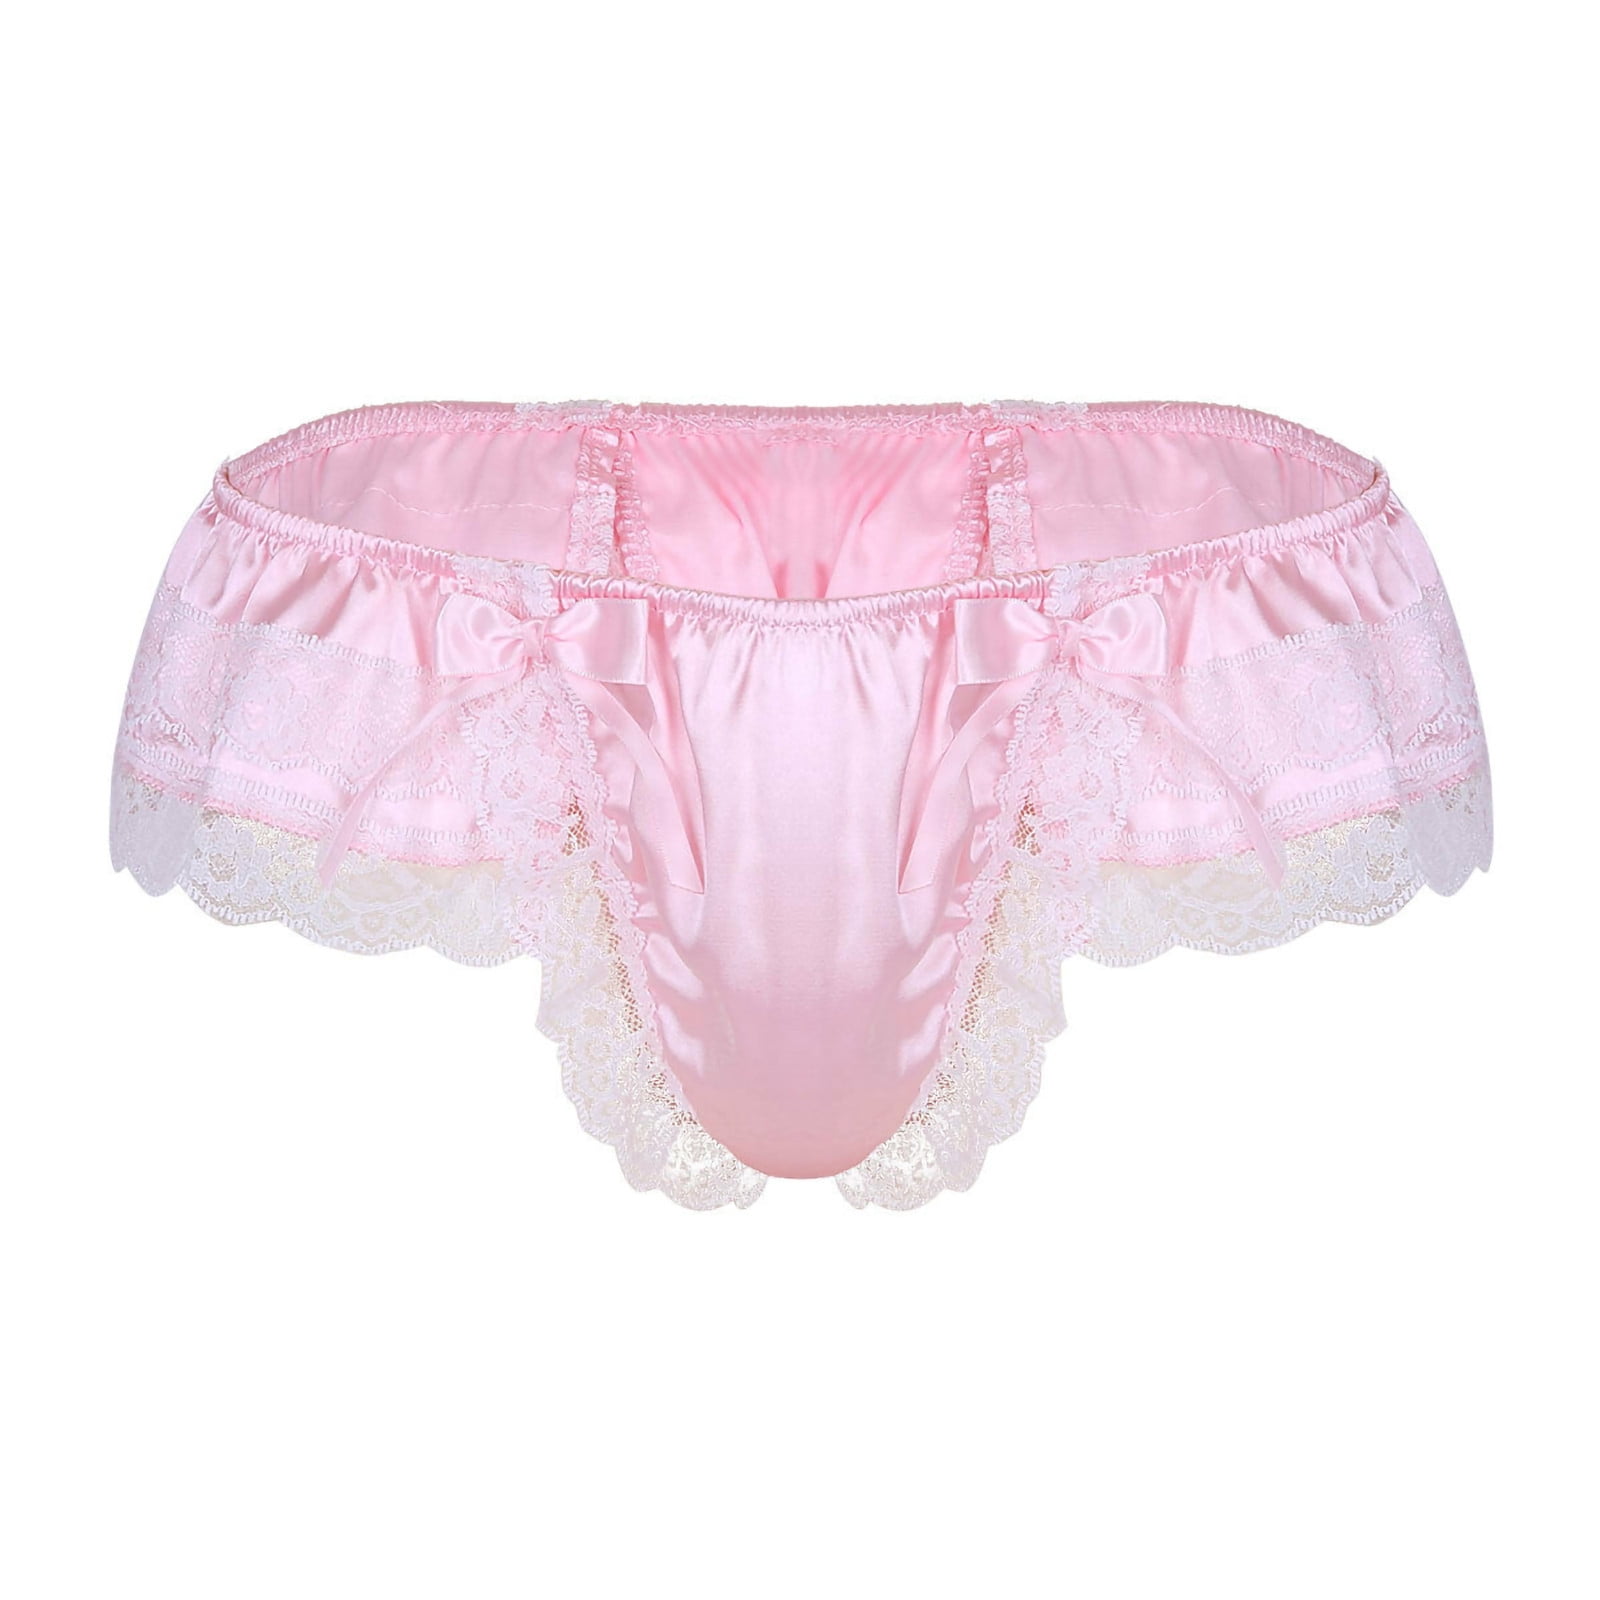 Mens See-through Lace Thongs Sissy Panties Bulge Pouch G-string Low Rise  Bowknot Briefs Underpants Lingerie Sissy Underwear Color: Type A Hot Pink,  Size: One Size